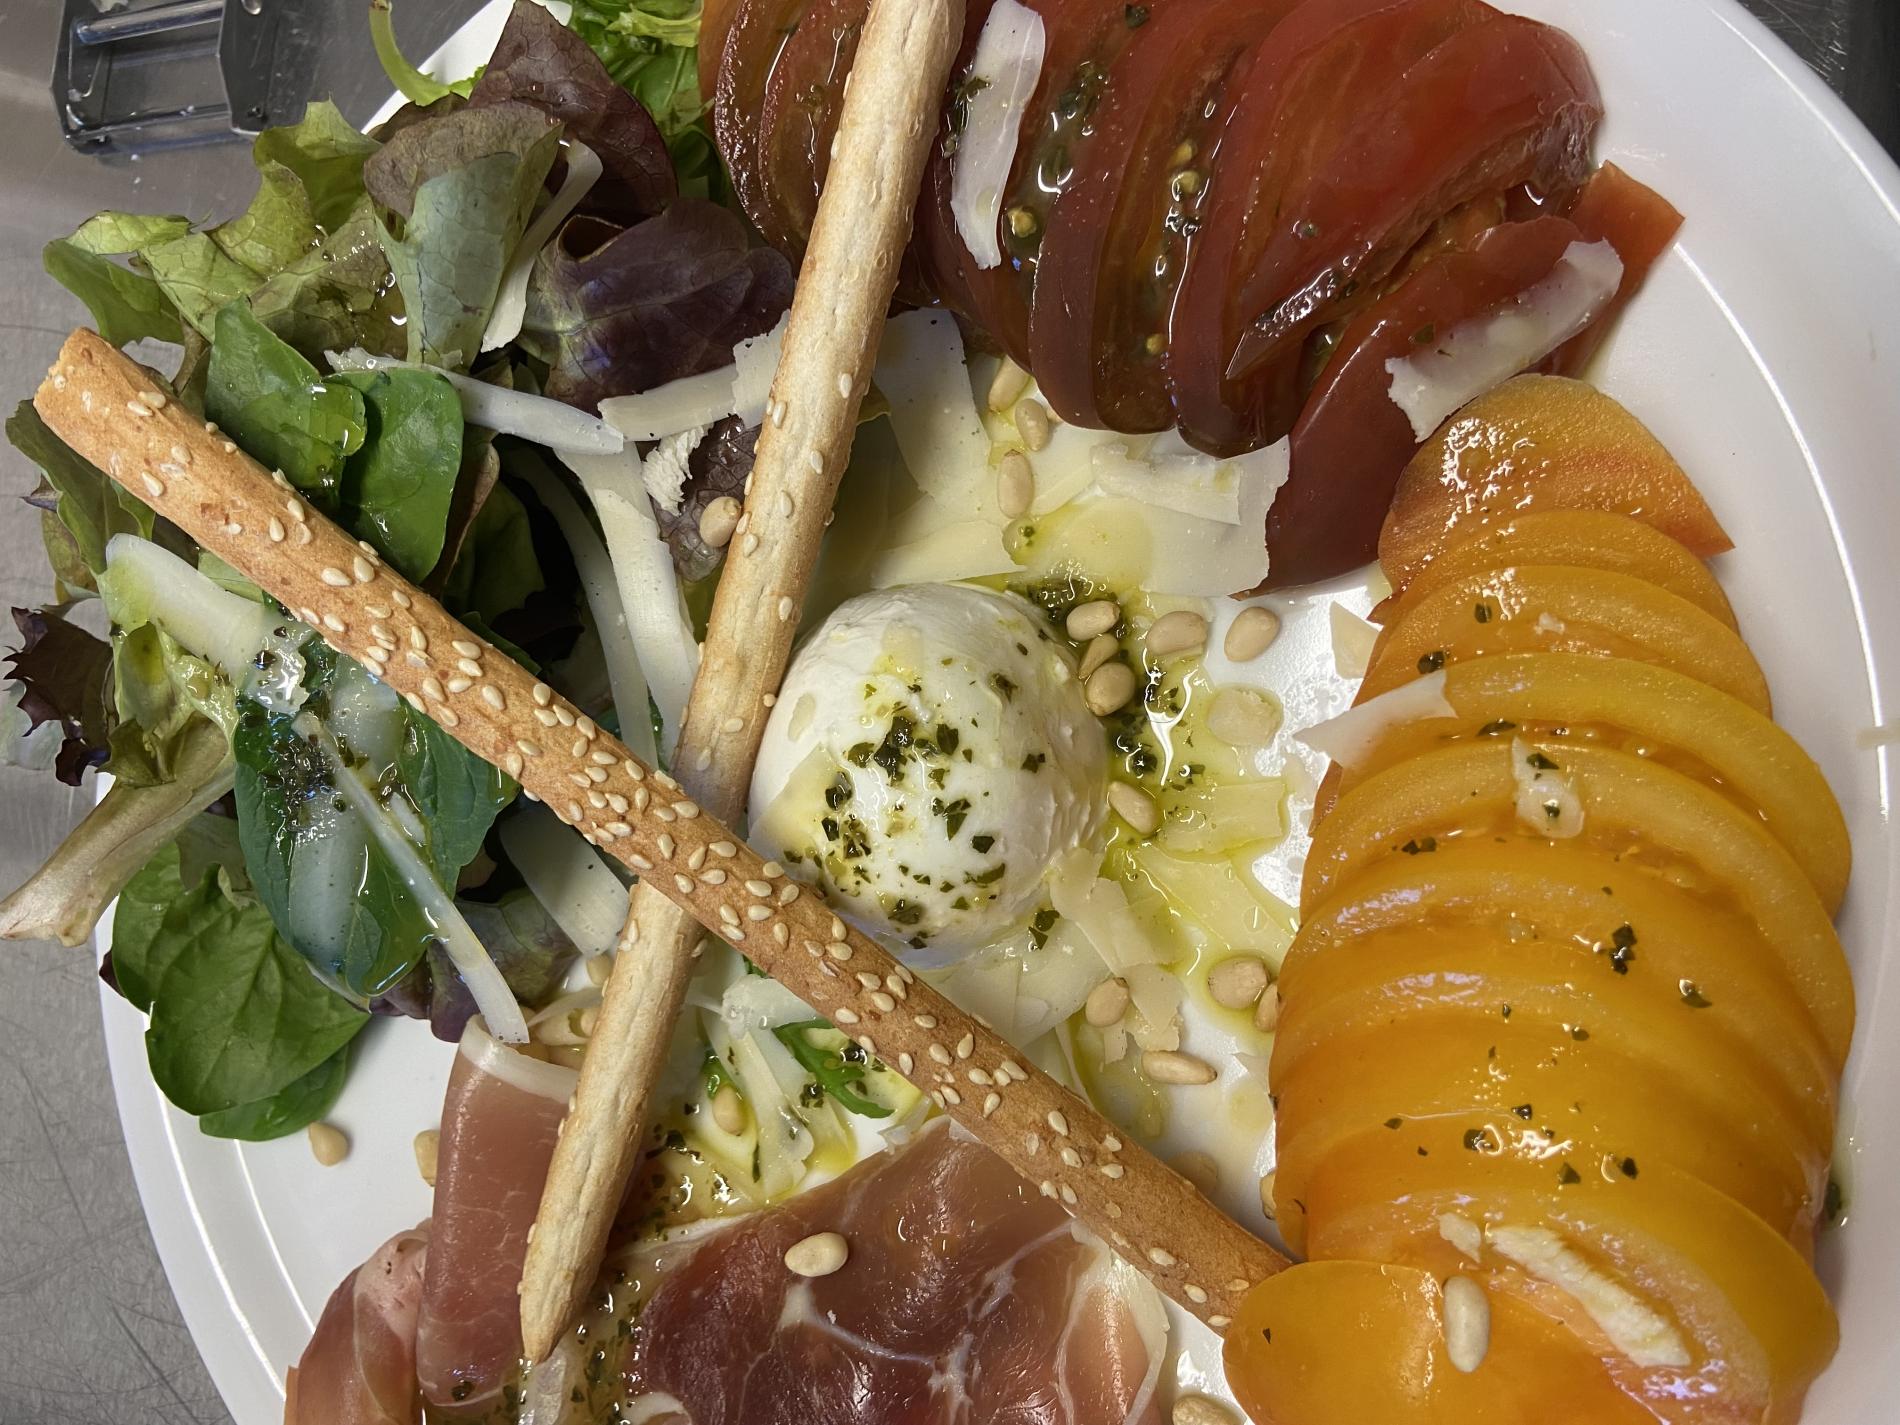 To whet your appetite, enjoy our Italian salad